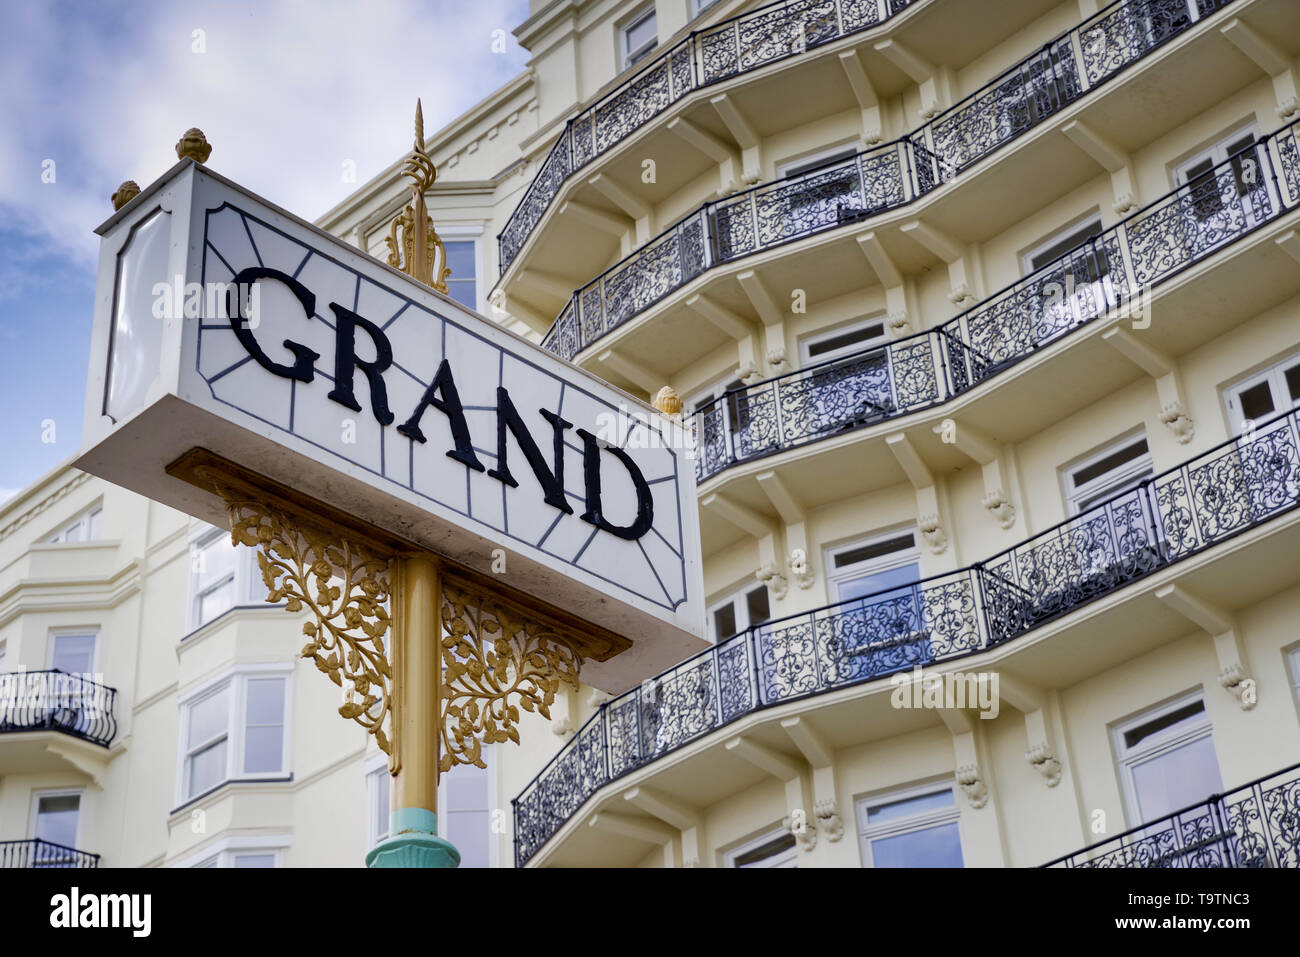 Sign outside The Grand Hotel in Brighton - East Sussex, UK Stock Photo